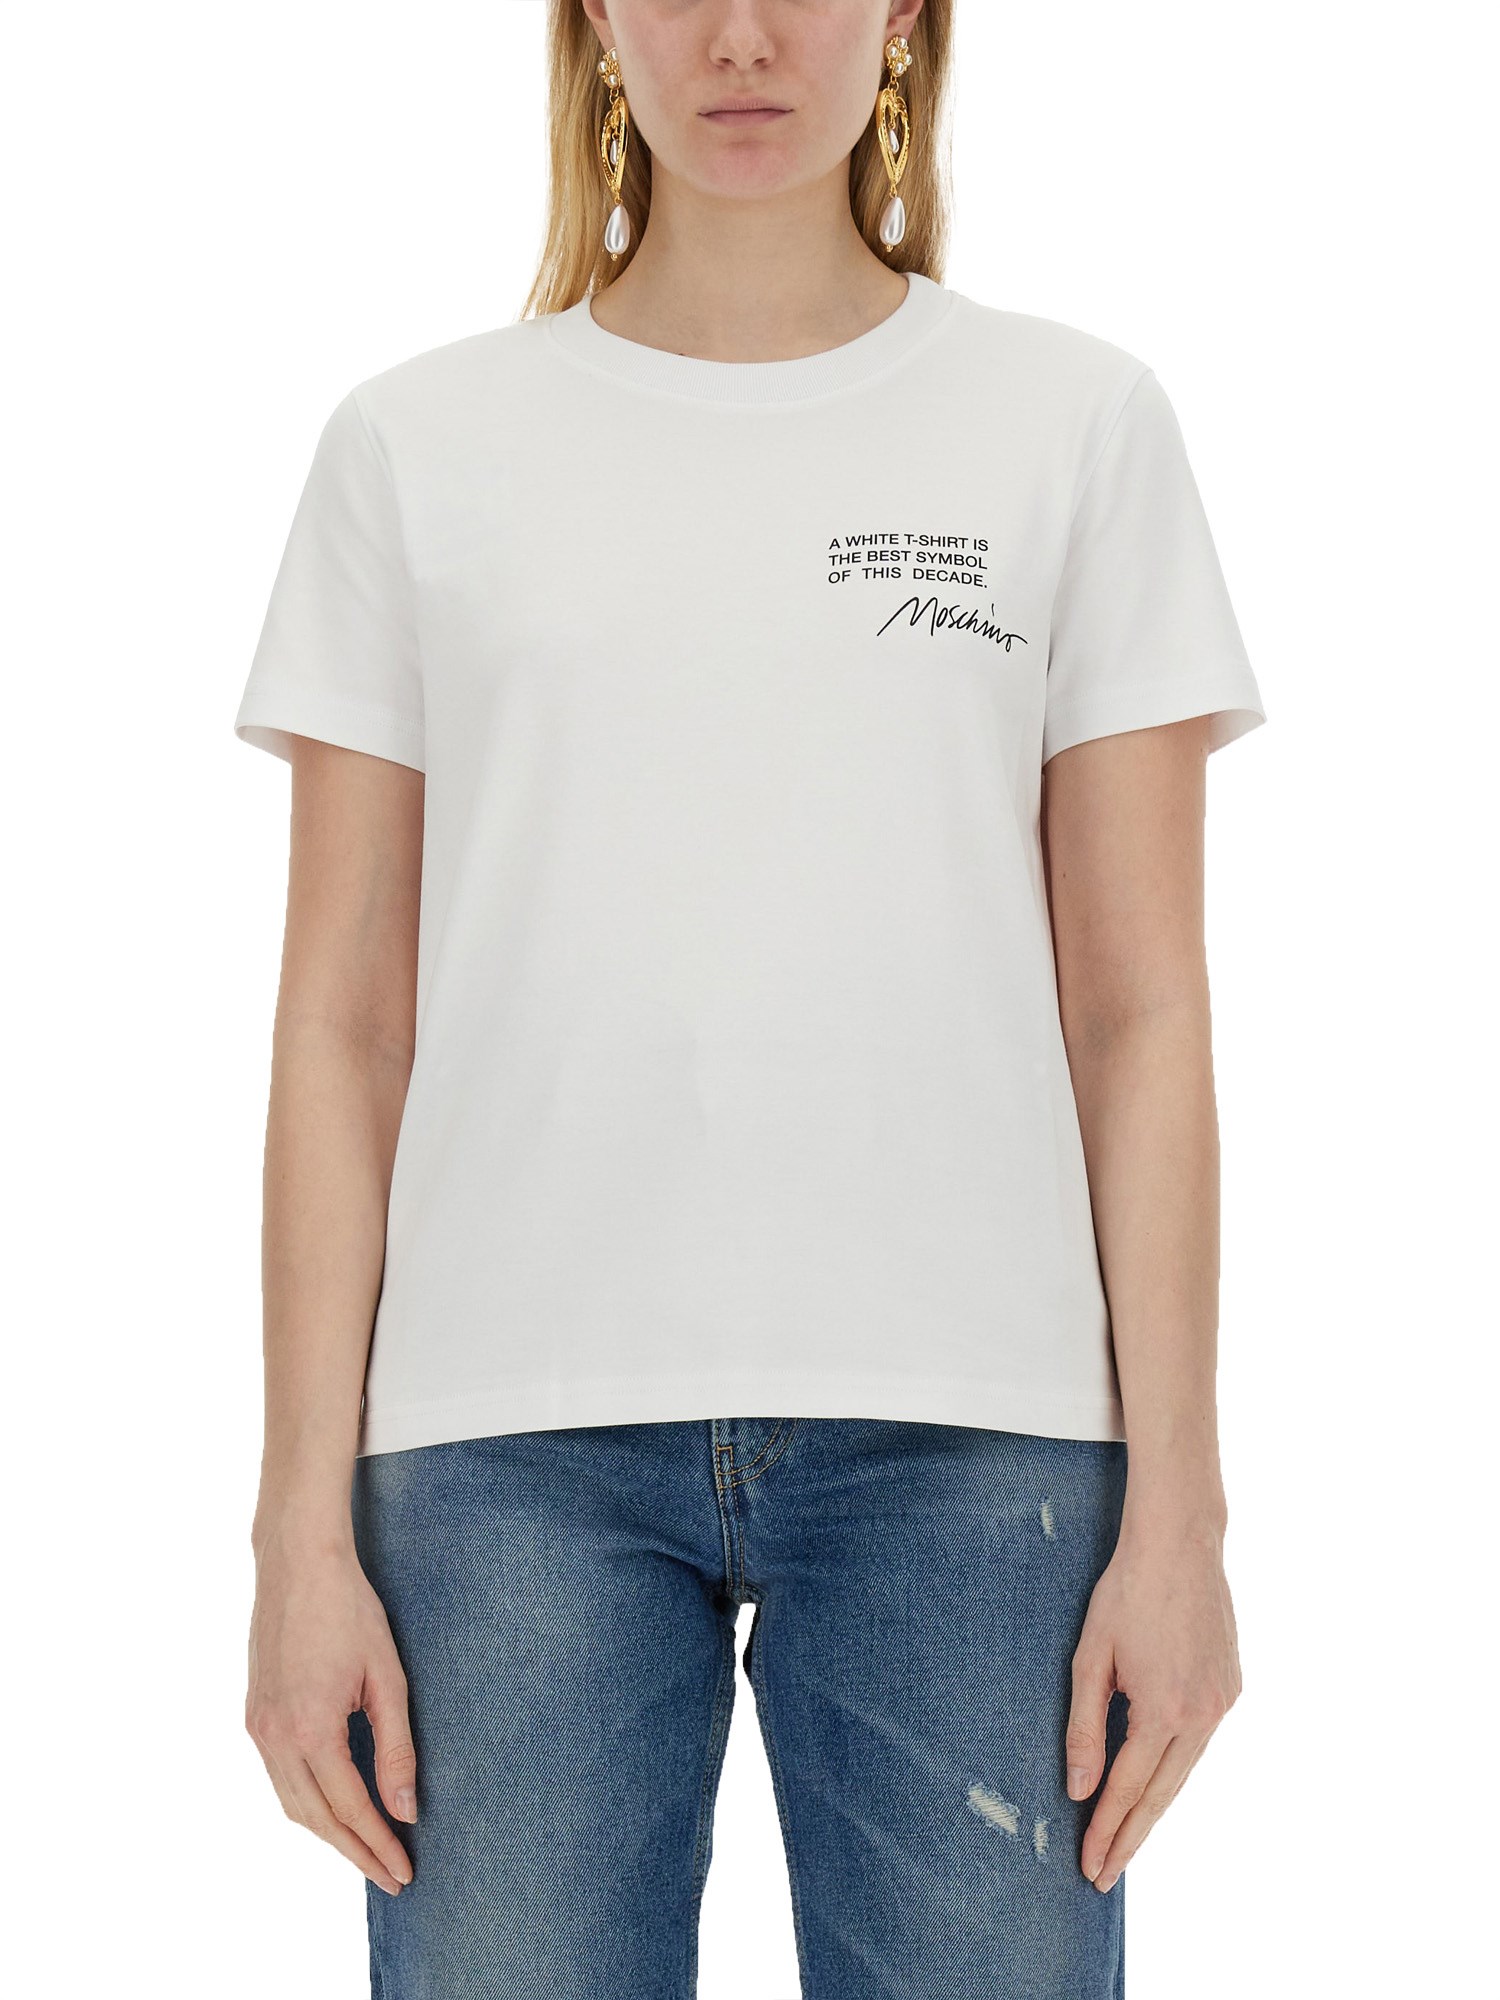 Moschino T-shirt With Logo In White